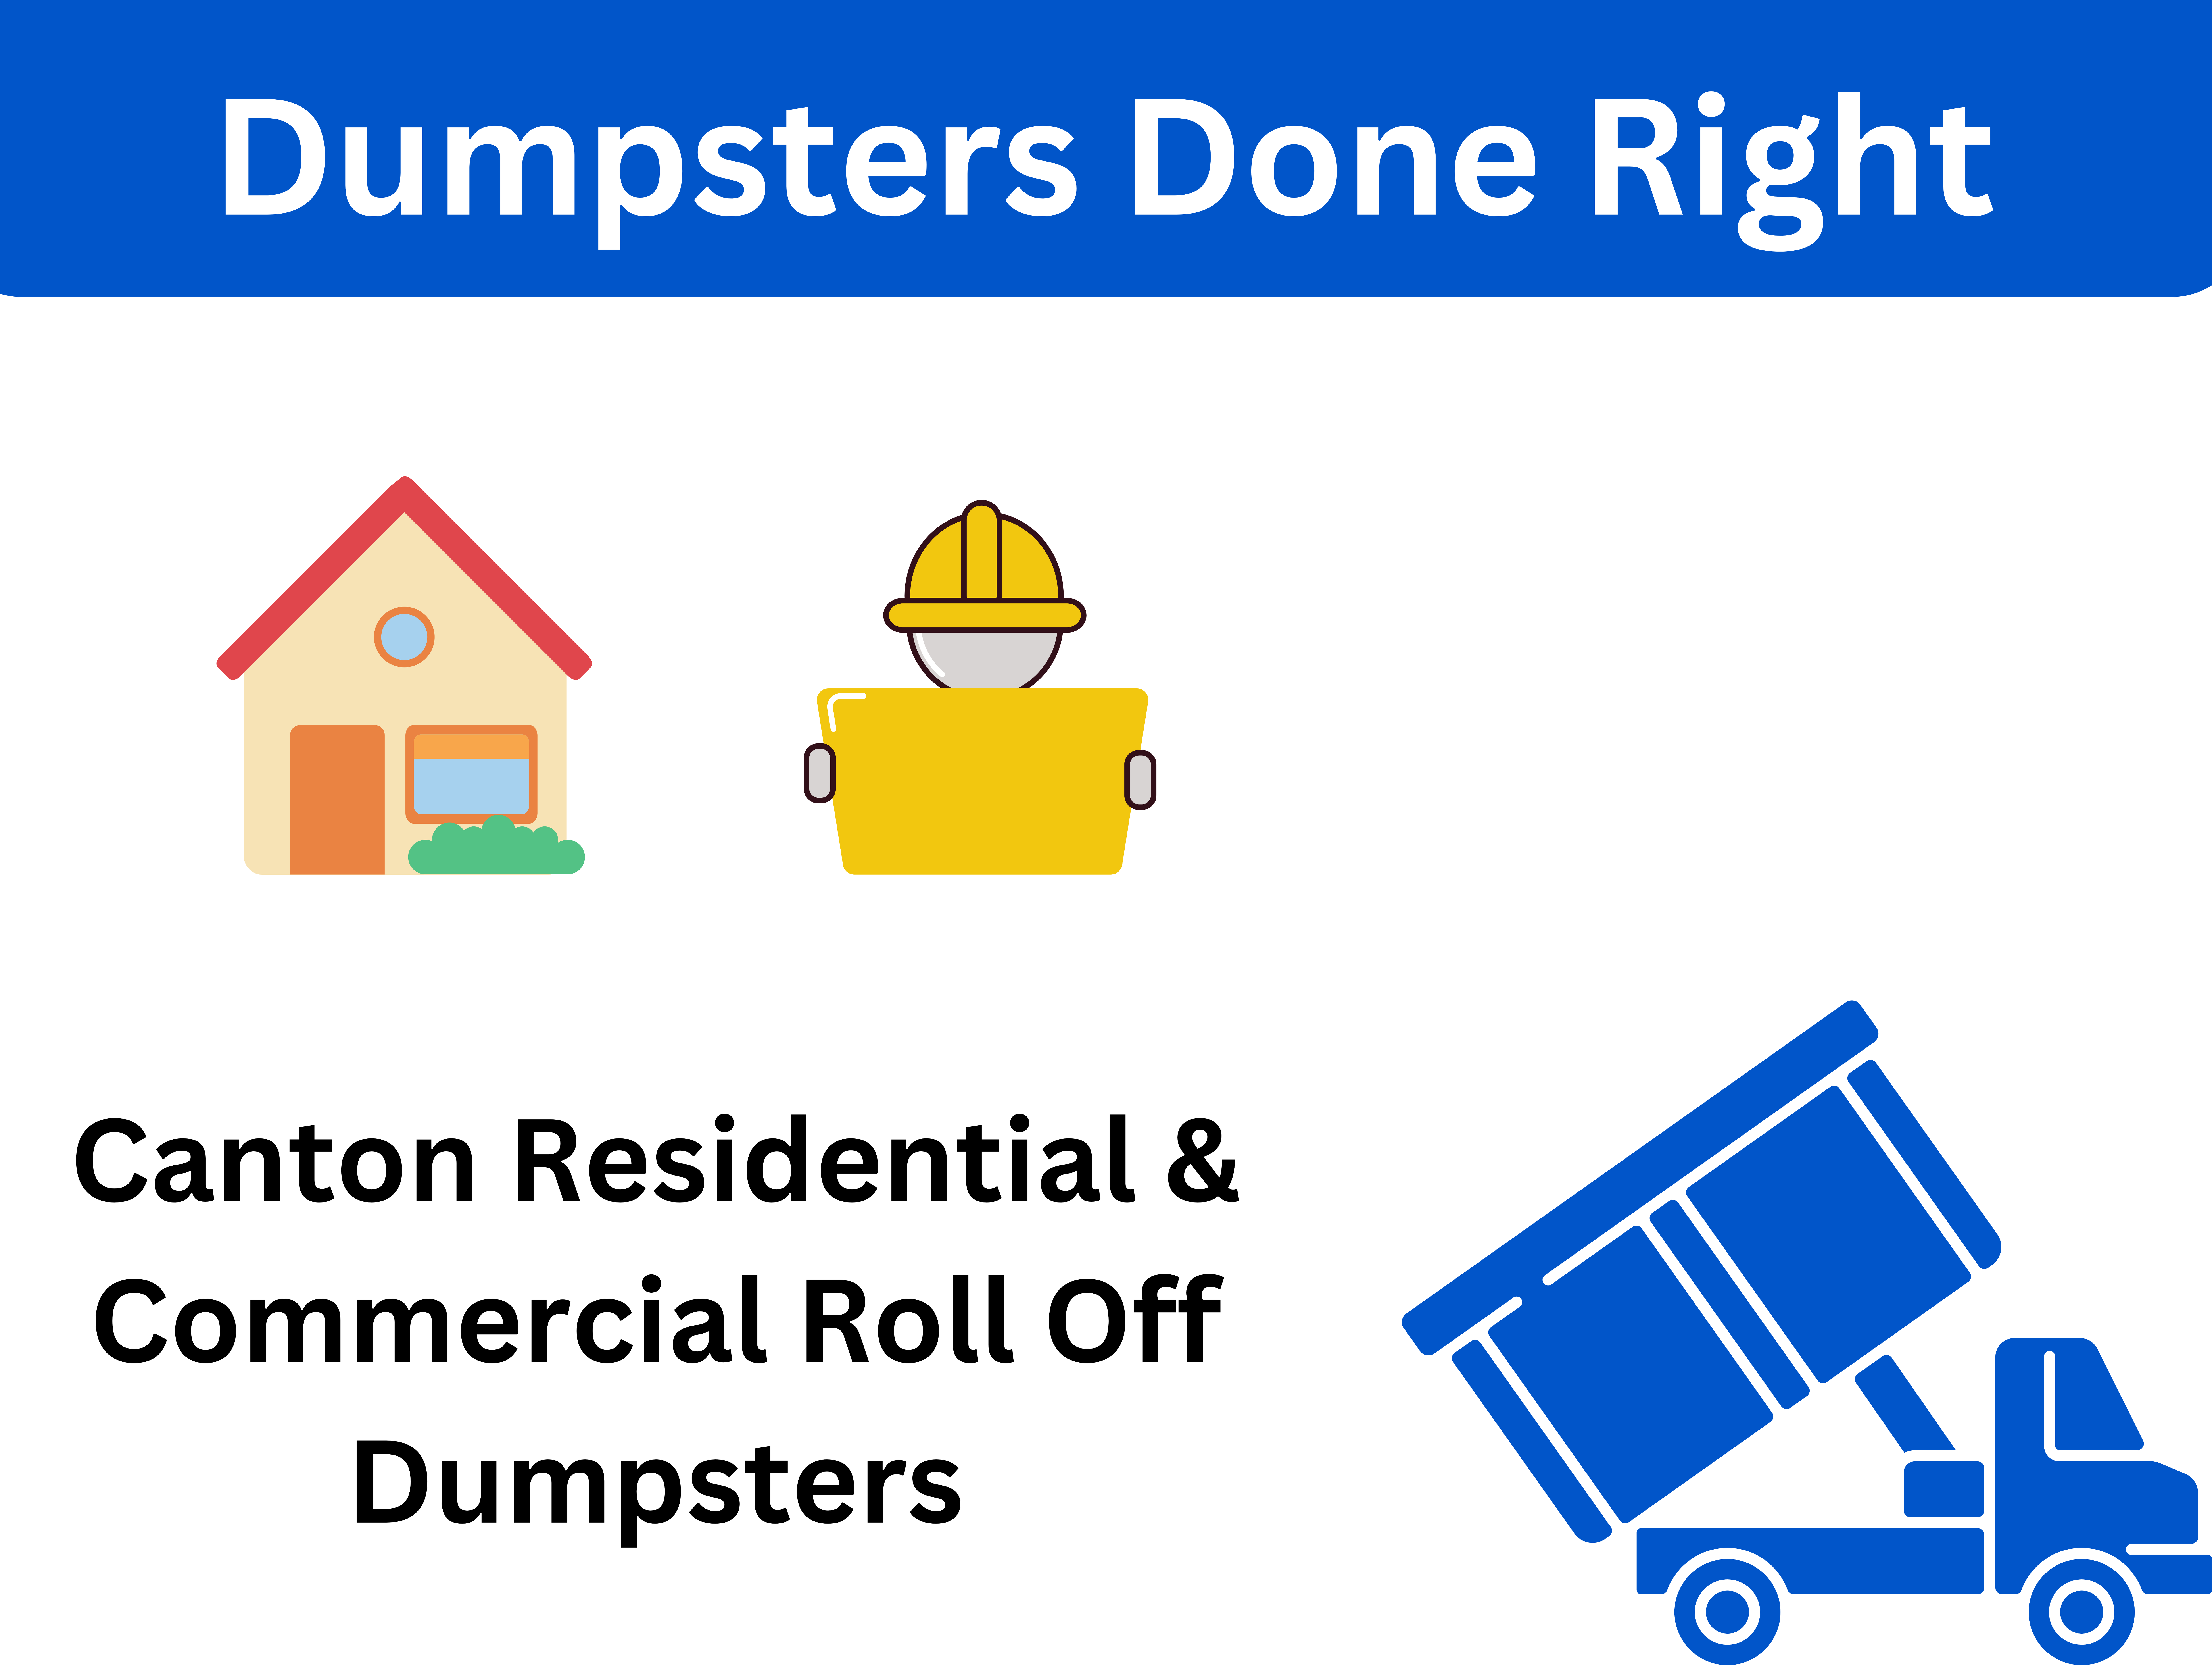 Type of dumpsters King Dumpsters delivers in Canton, Ohio